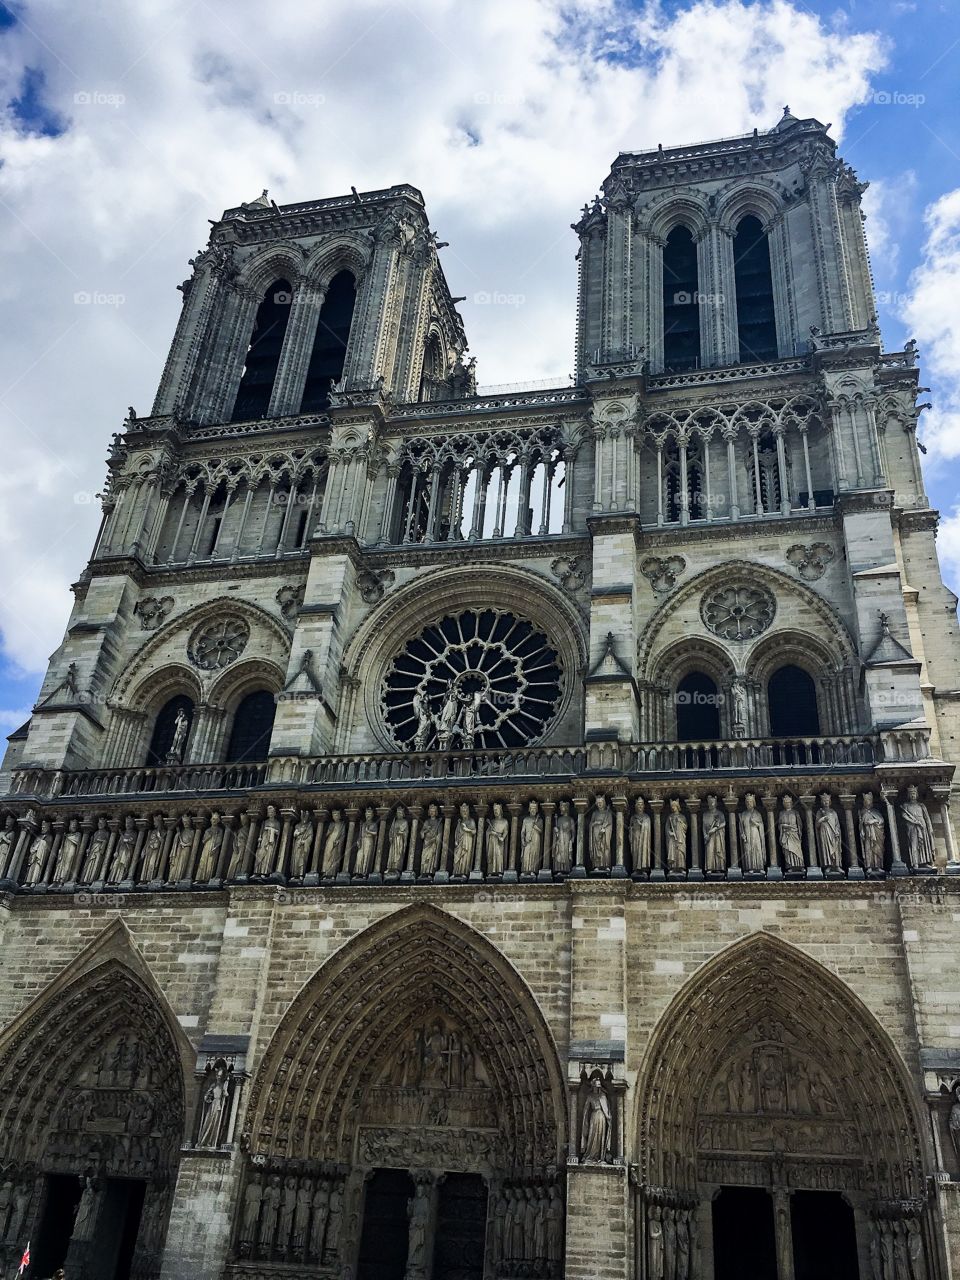 The Notre Dame cathedral from the outside. The sky is mostly cloudy, but the cathedral takes up most of the shot.